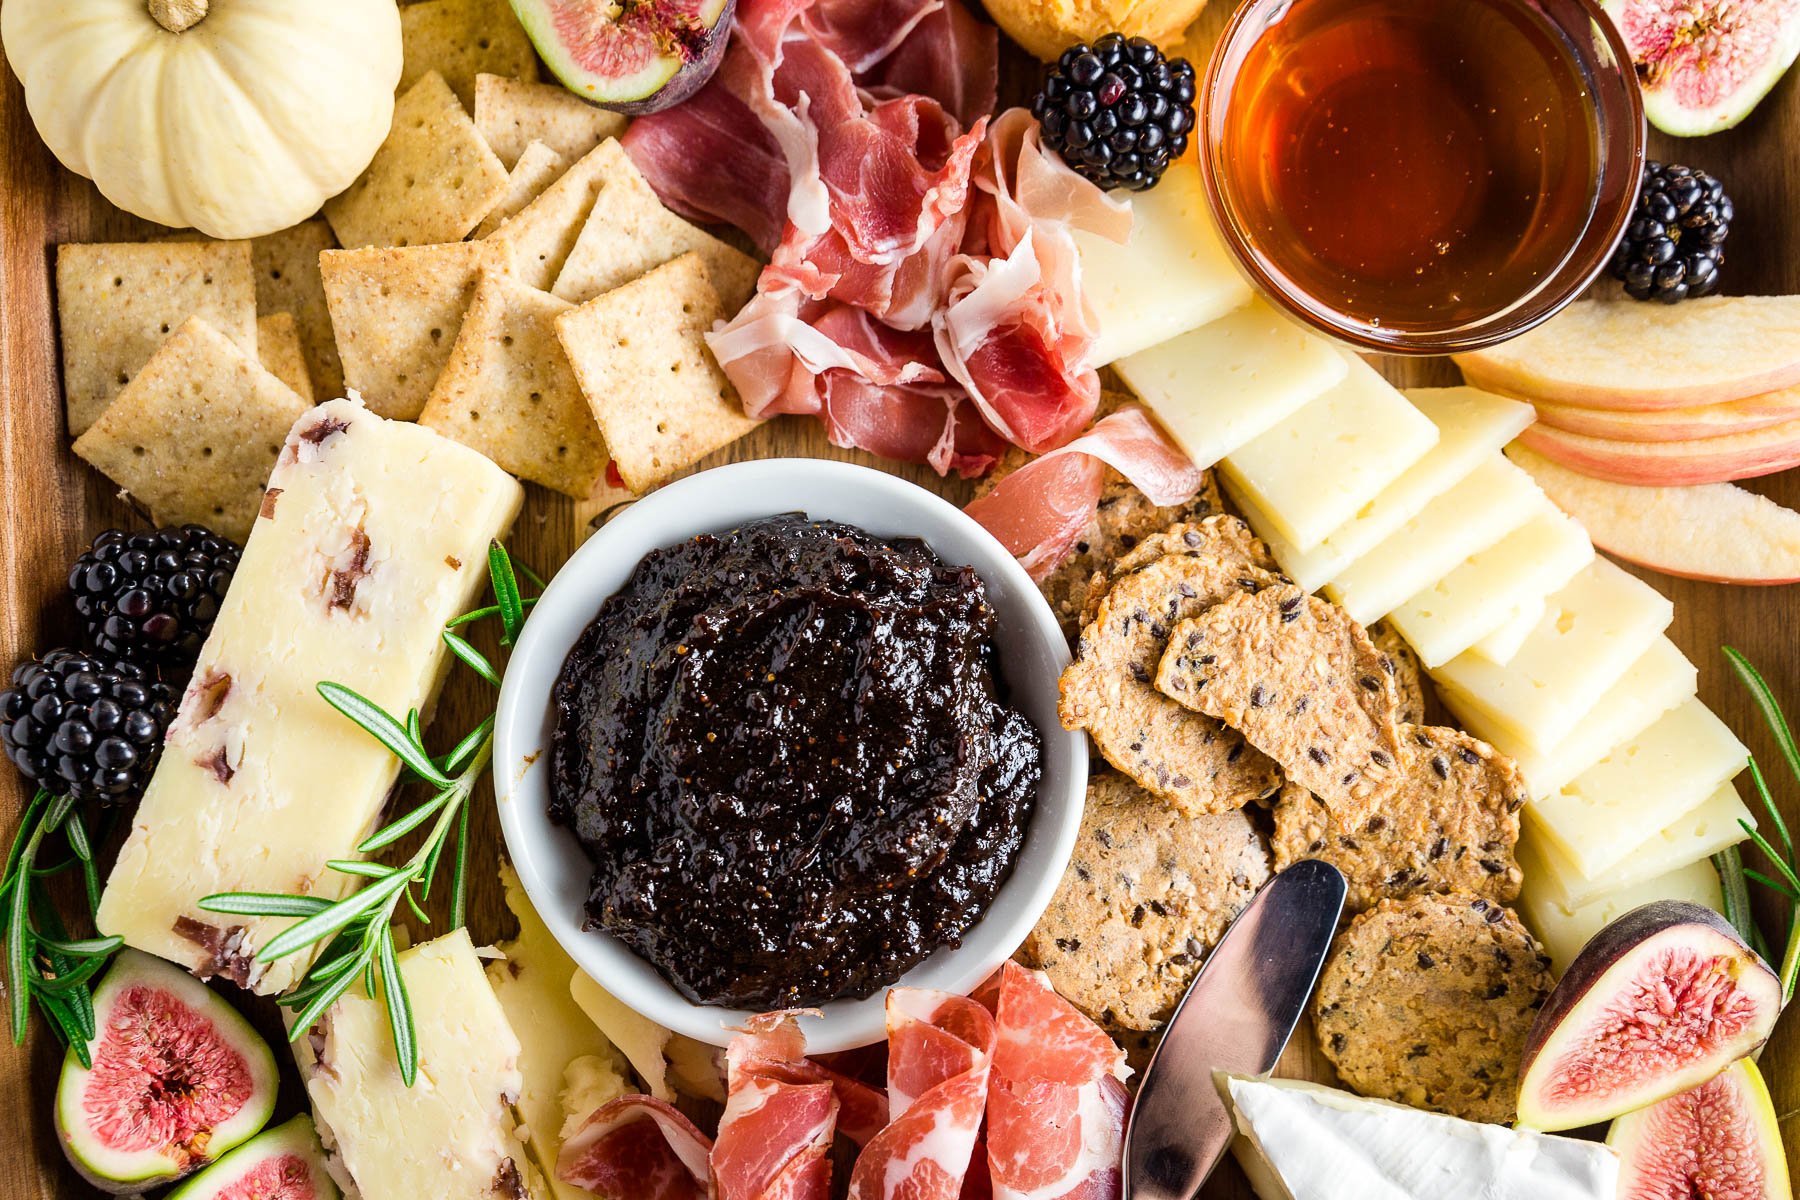 Orange fig jam with cheeses, meats and gluten-free crackers for a fall harvest charcuterie and cheese board